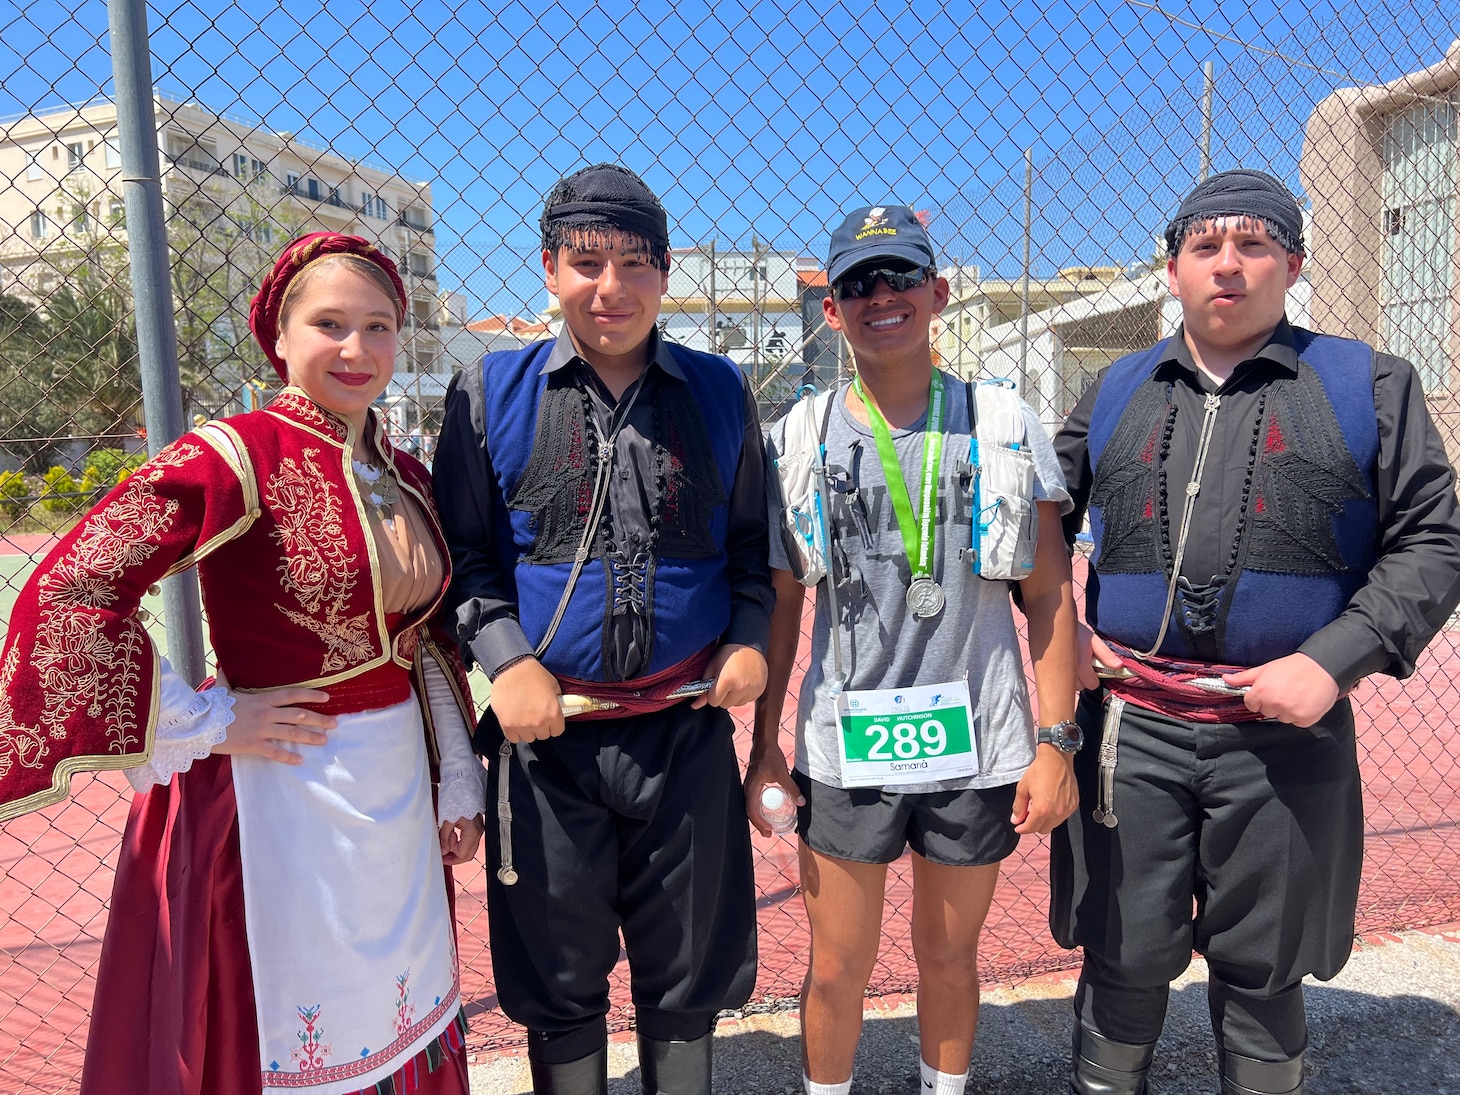 Builder Constructionman David Hutchinson (second from right), assigned to Naval Facilities Engineering Systems Command, Europe, Africa, Central, poses with traditional Cretan dance performers after running 26.2 miles to complete the Crete Marathon in Chania, Crete, Greece on April 14, 2024.